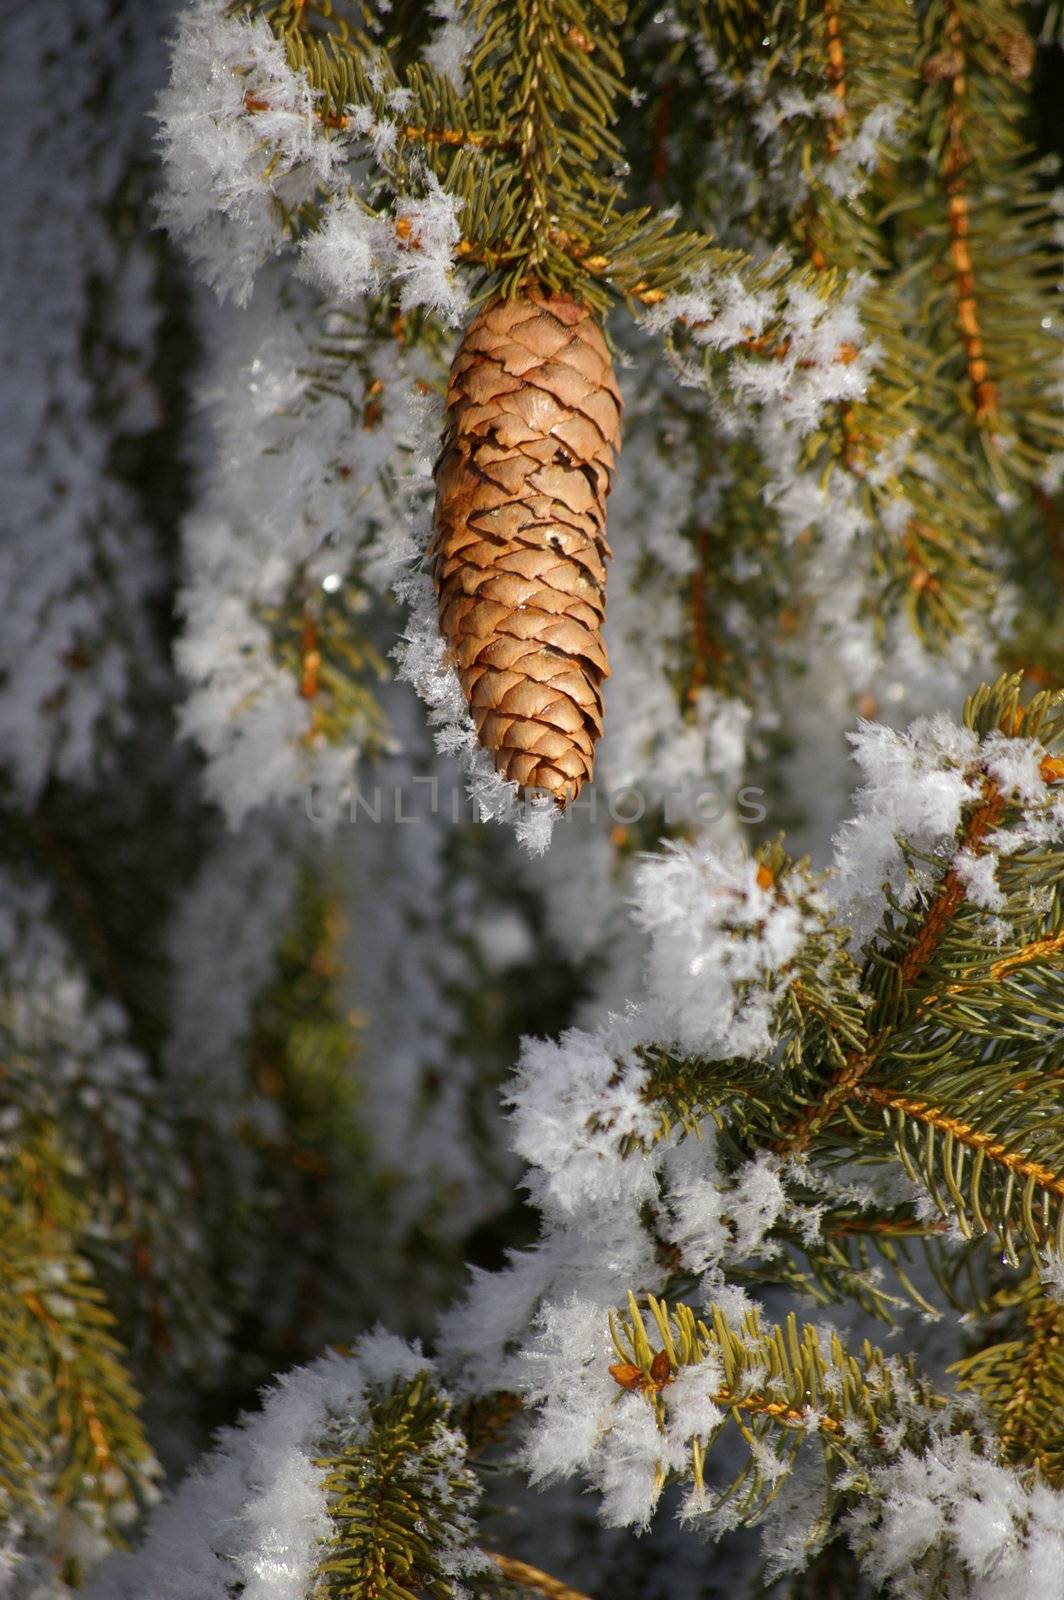 a fir cone on a branche in winter